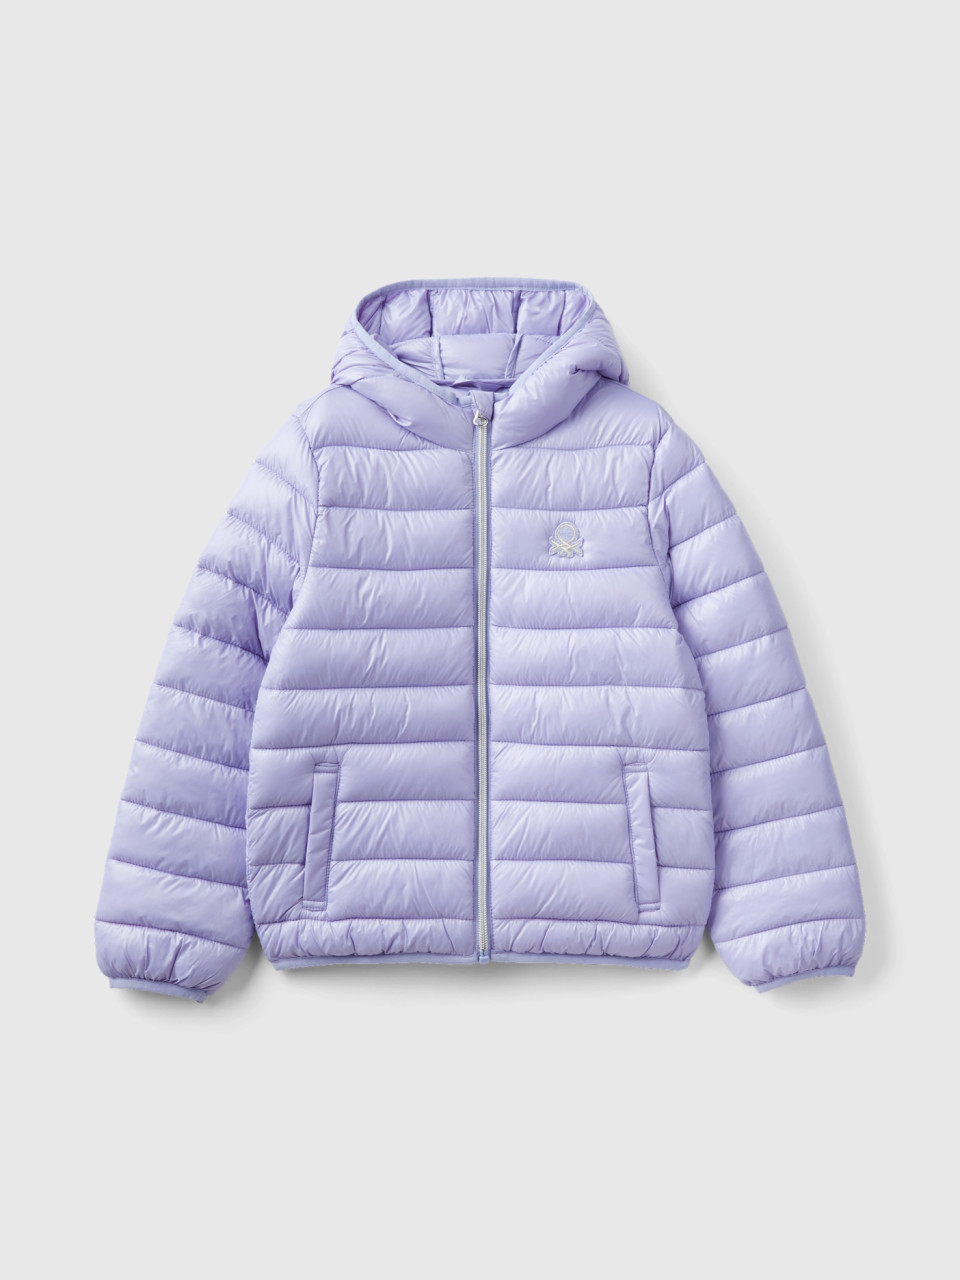 Benetton, Puffer Jacket With Hood, Lilac, Kids